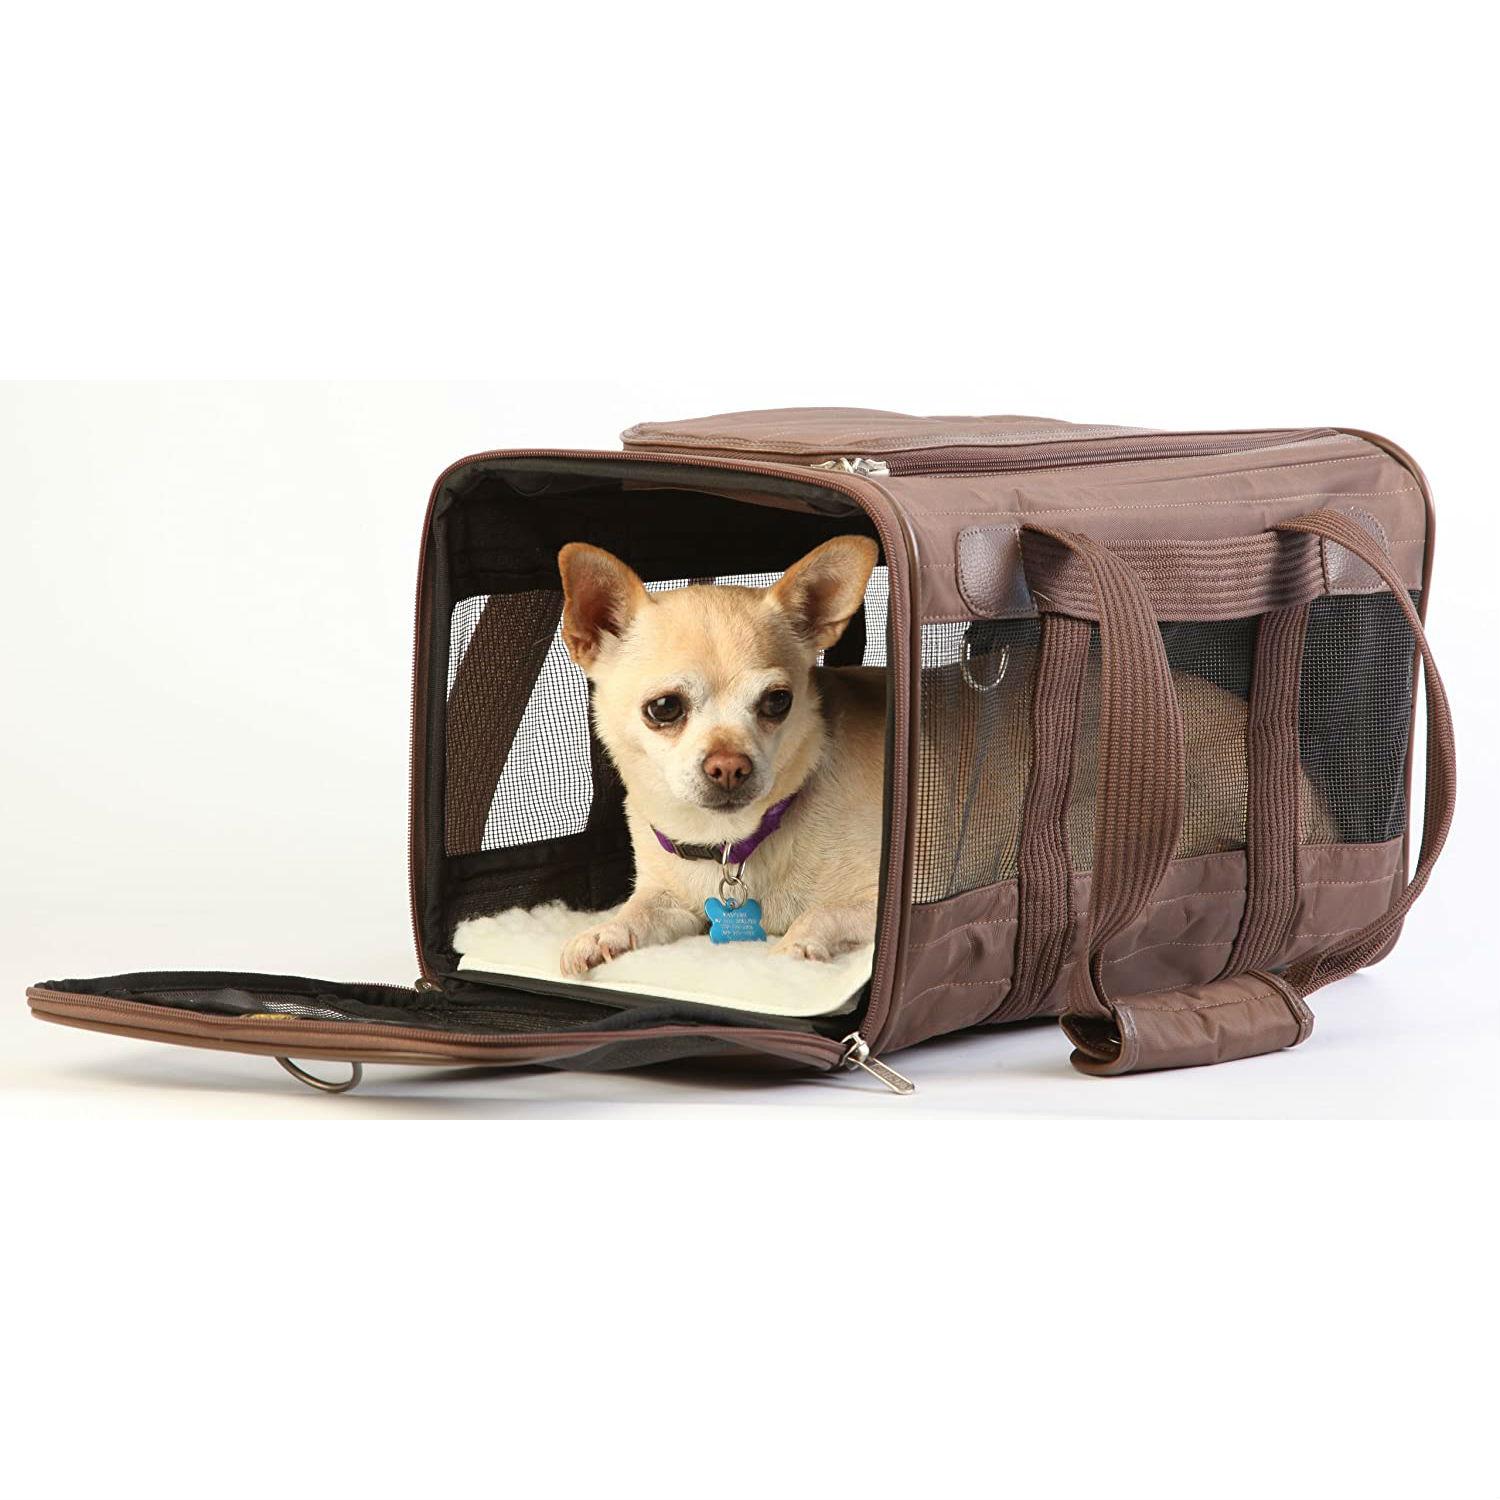 Sherpa: Safe and Comfortable Pet Travel Products